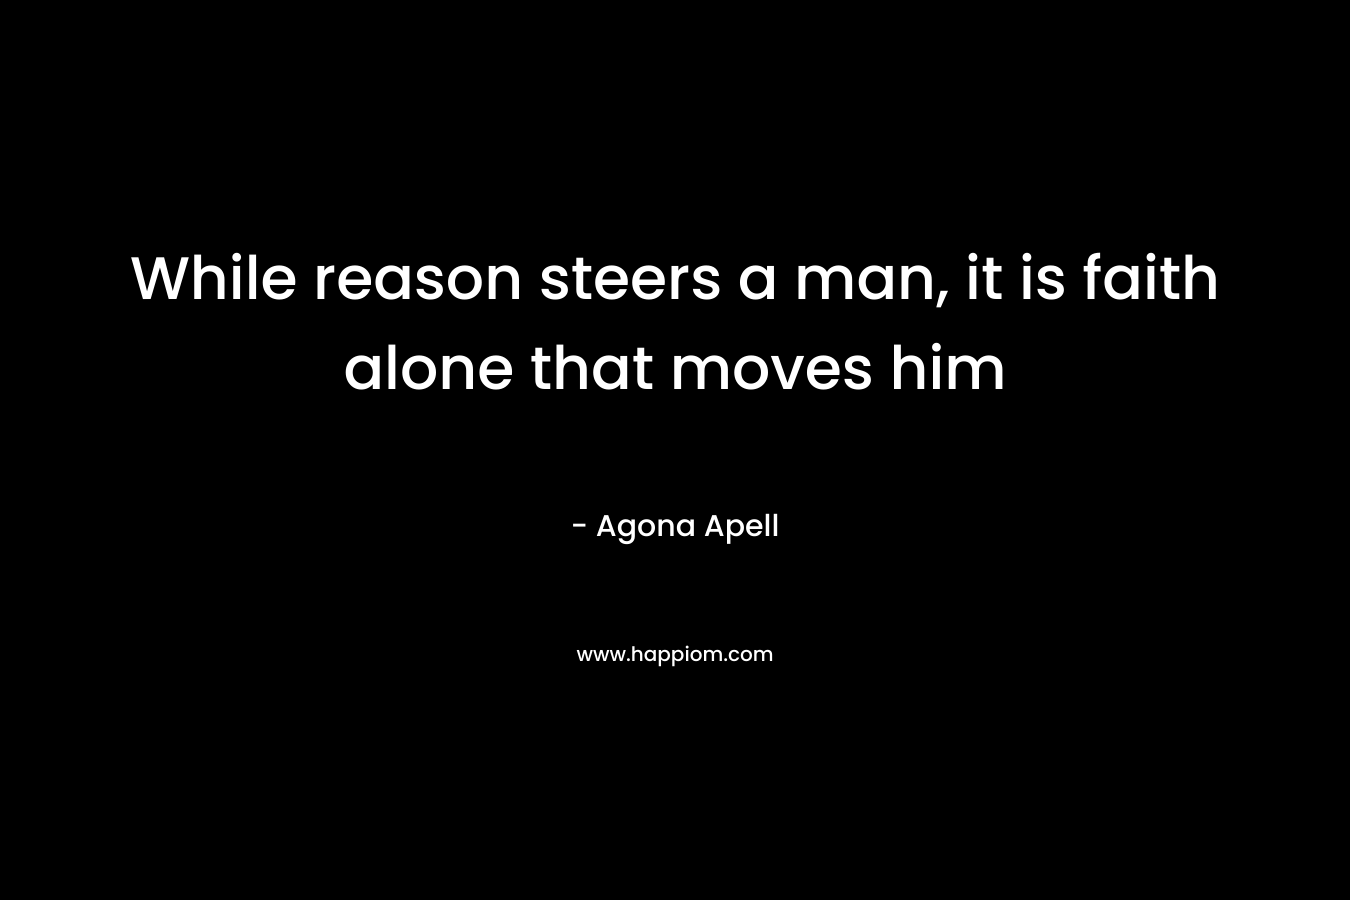 While reason steers a man, it is faith alone that moves him